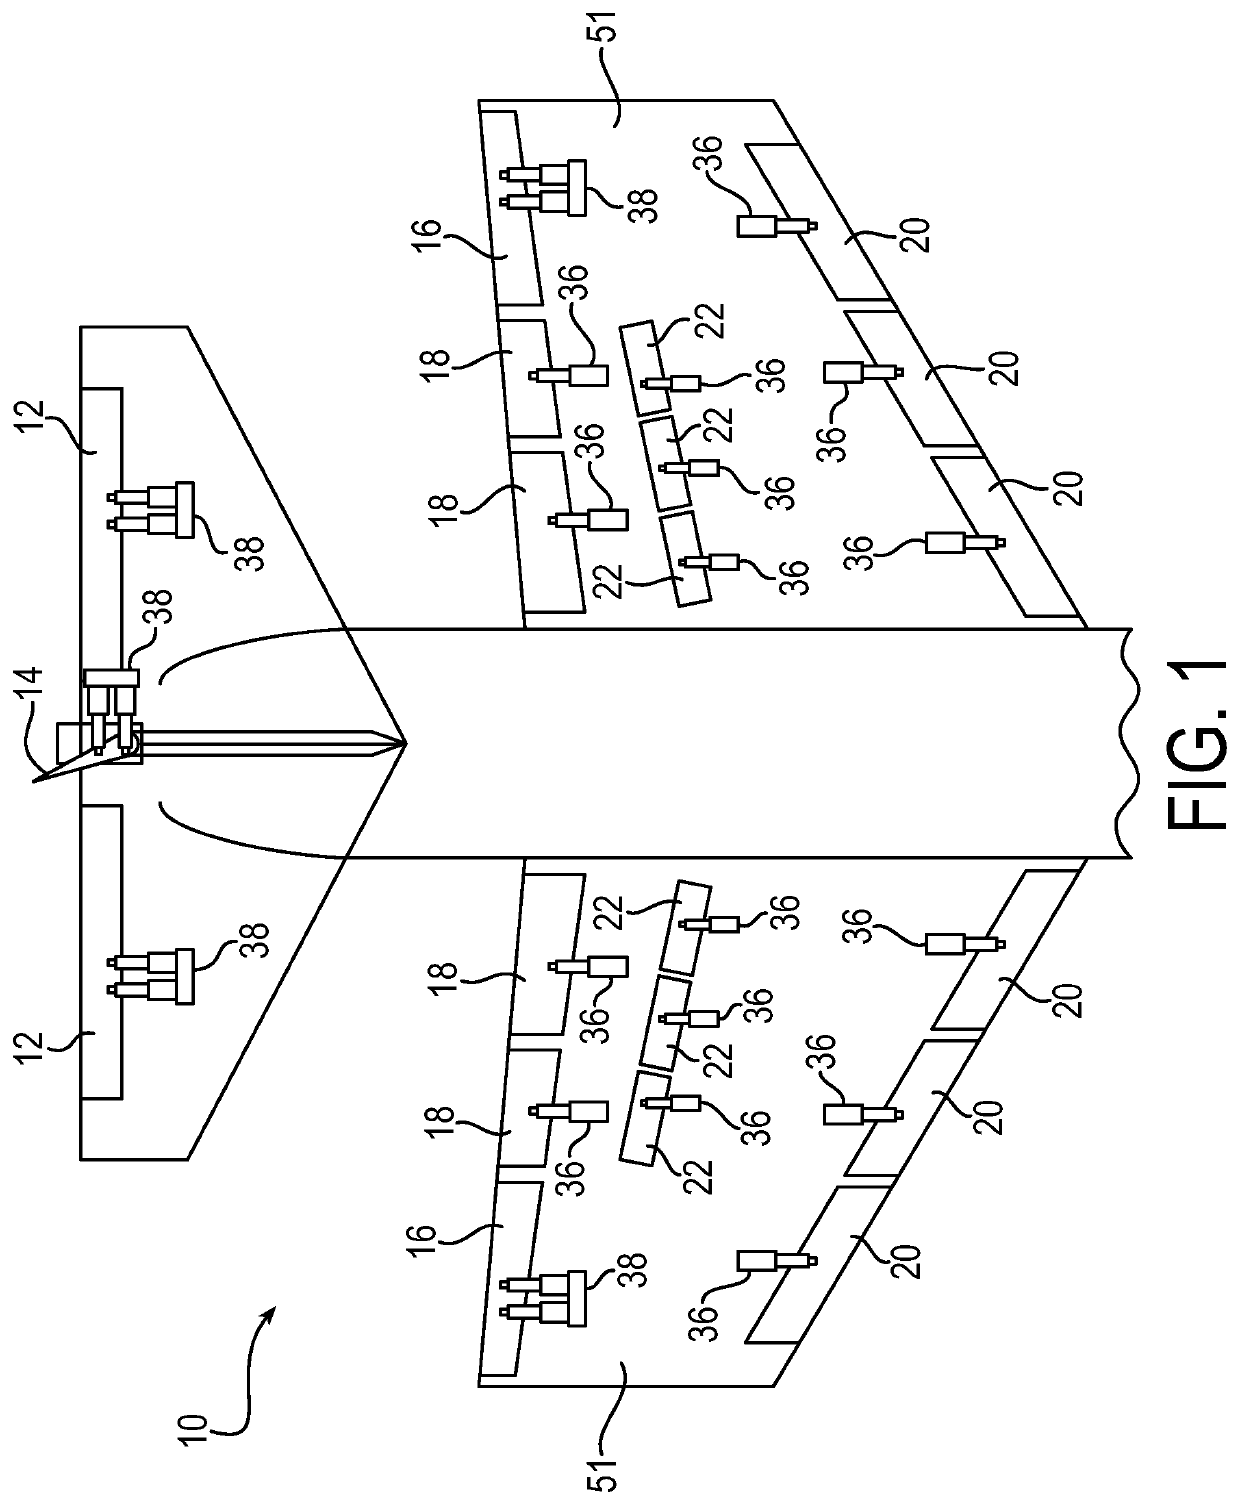 Near synchronous distributed hydraulic motor driven actuation system